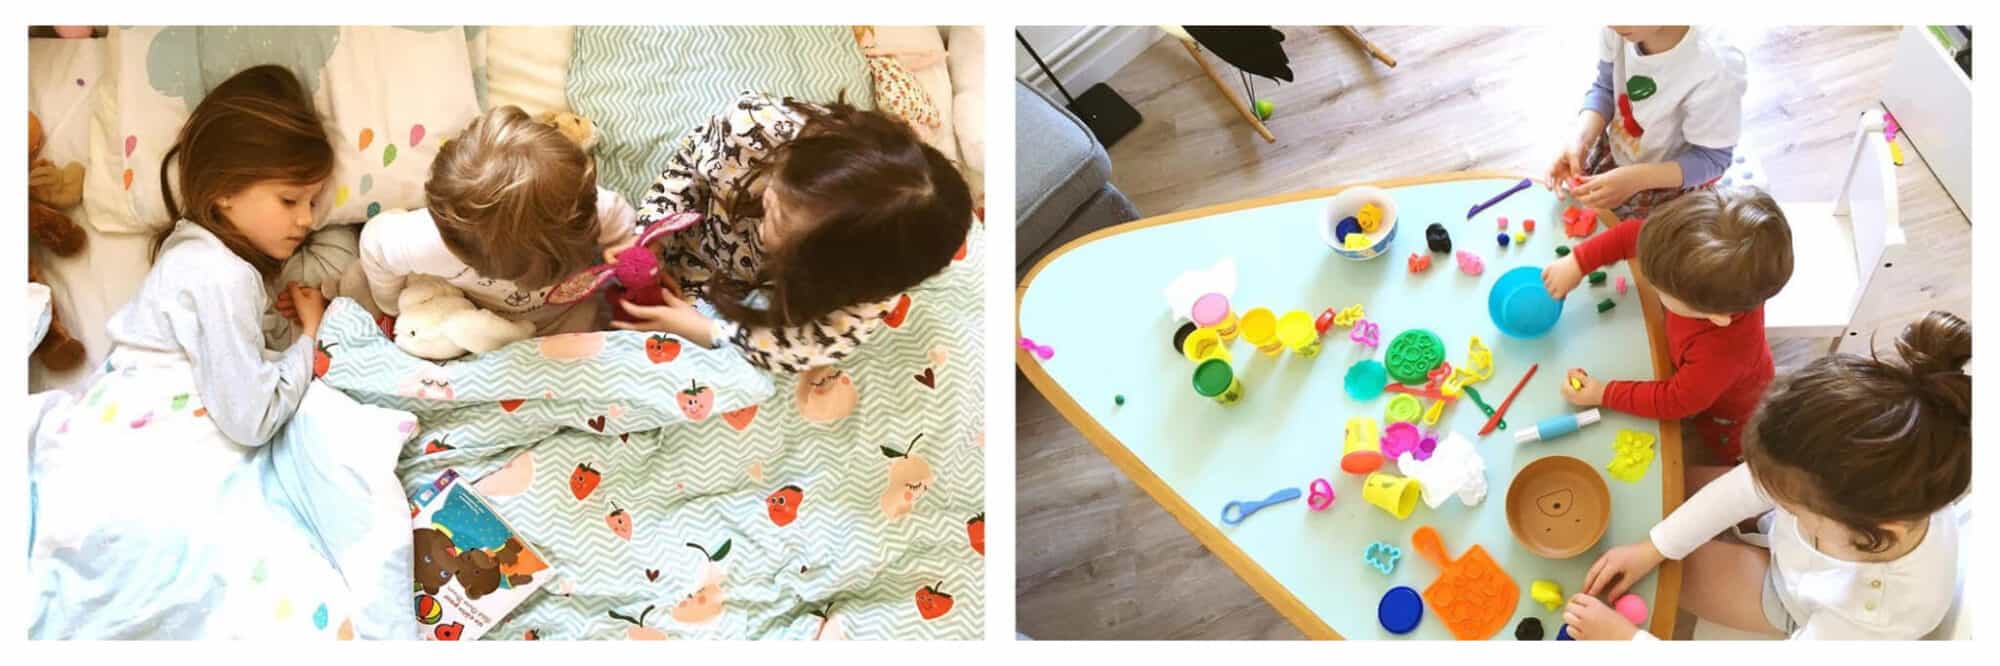 Left: Three children sit and lay in bed under a blue duvet that has a print of pink and red strawberries, Right: Three children play with play-doh and colorful toys on top of a blue table.